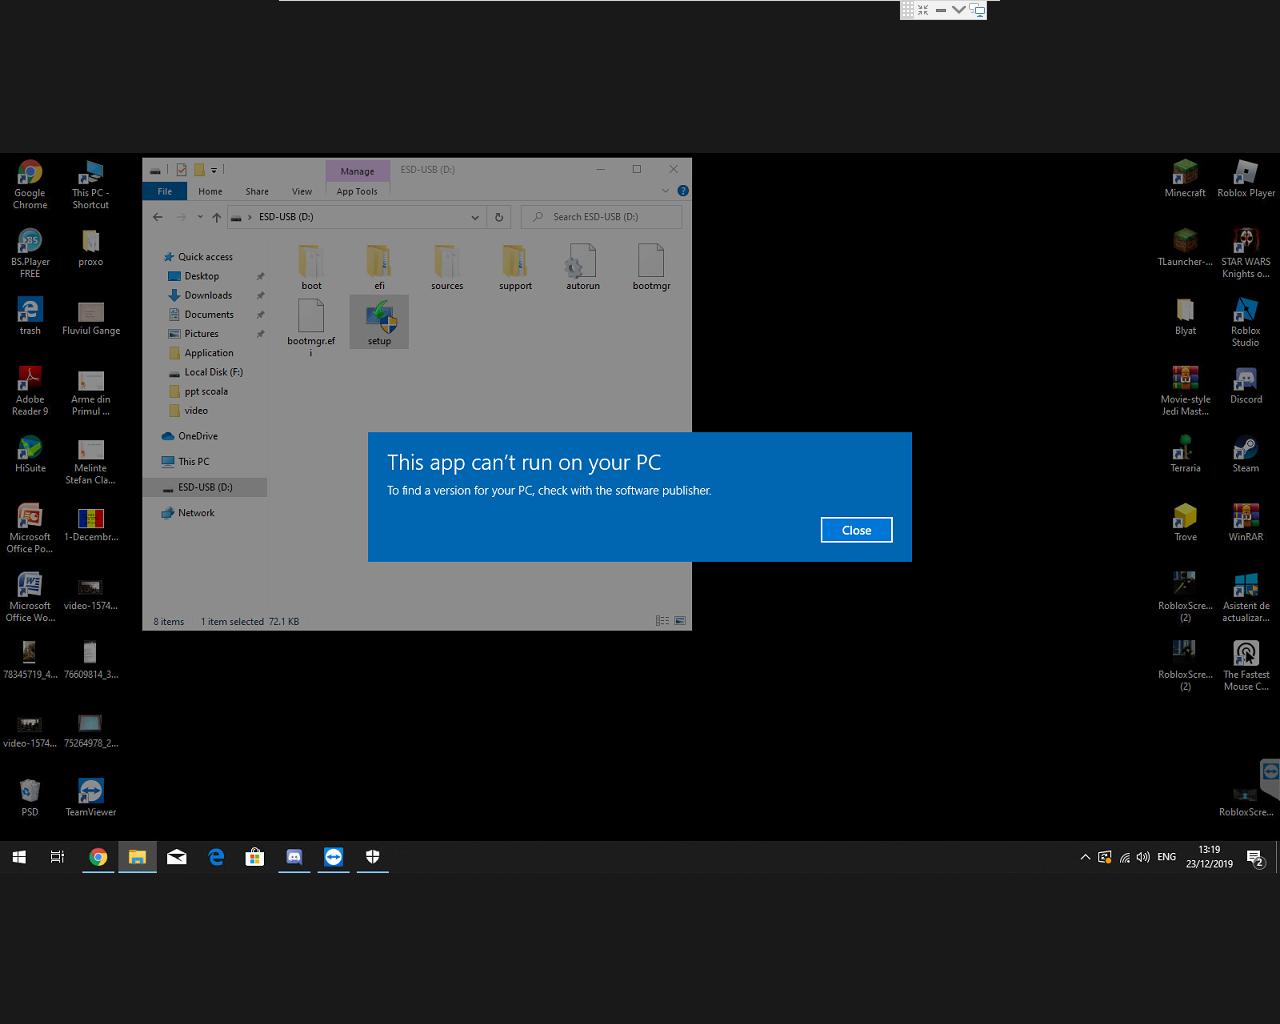 My Windows 10 Setup can't be opened on my computer. 70a33391-f0b9-4800-918b-bfecfdc52a1b?upload=true.png